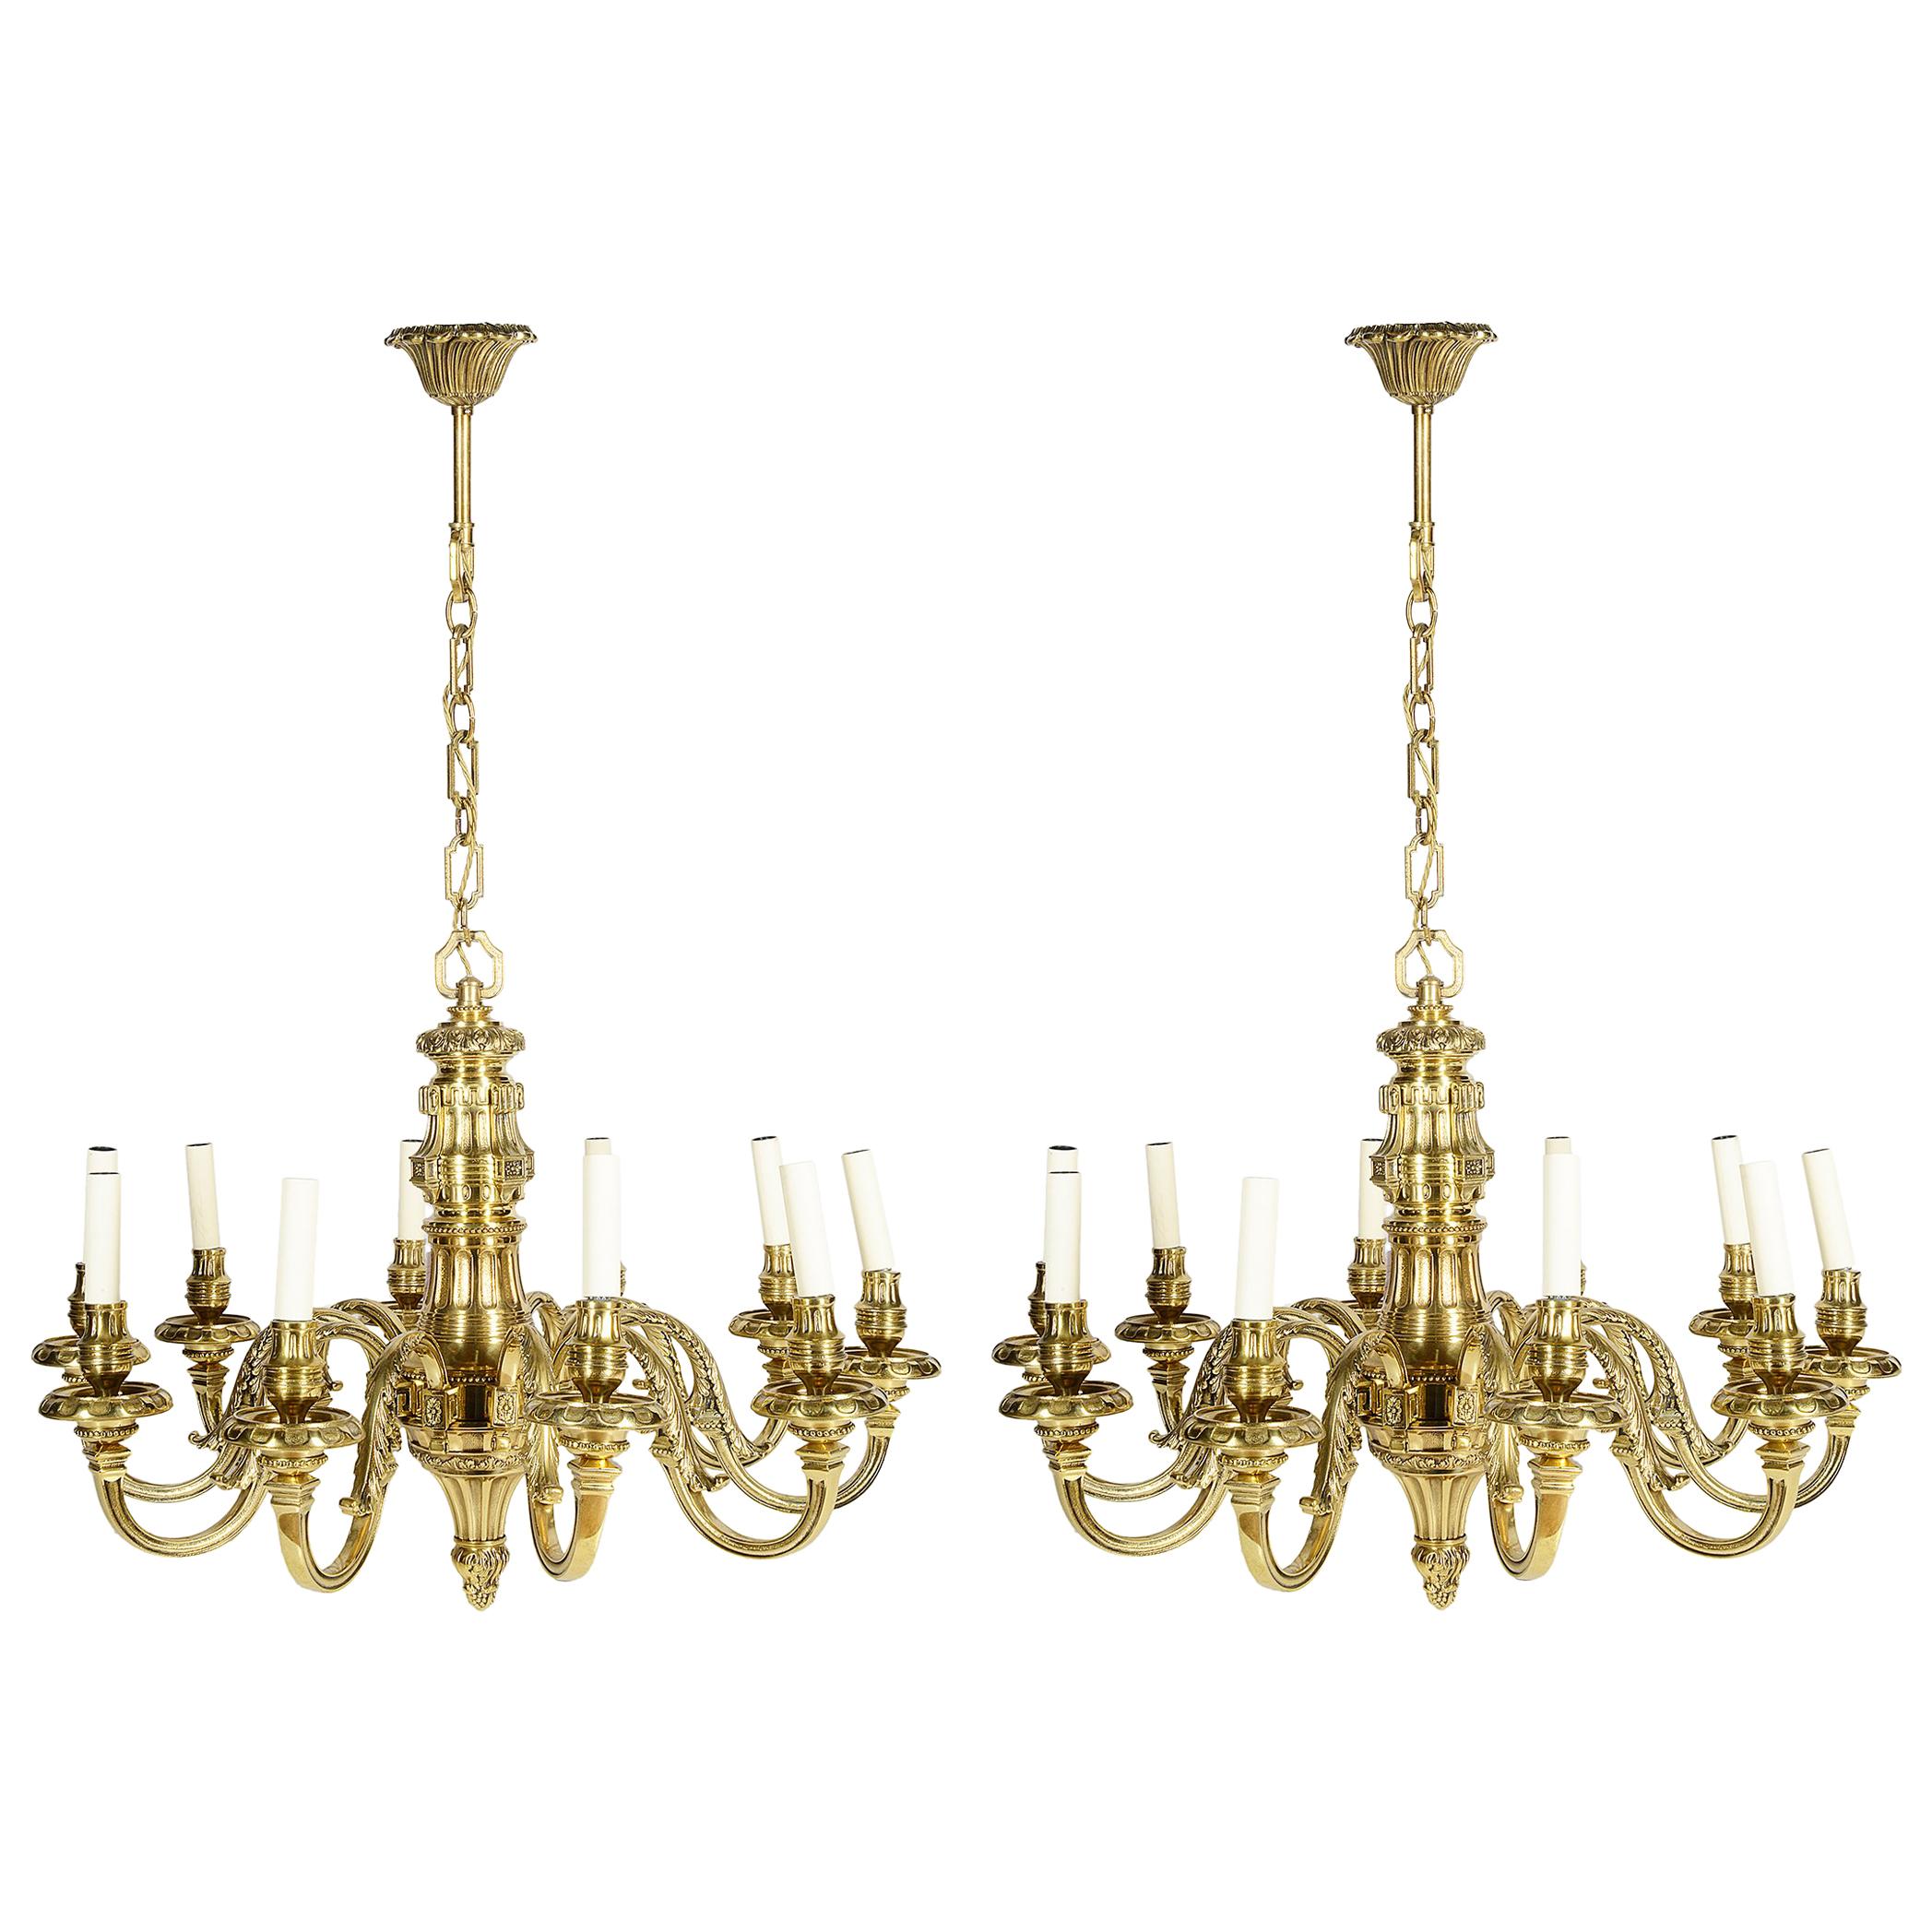 Pair of 19th Century Classical Ormolu Chandeliers For Sale